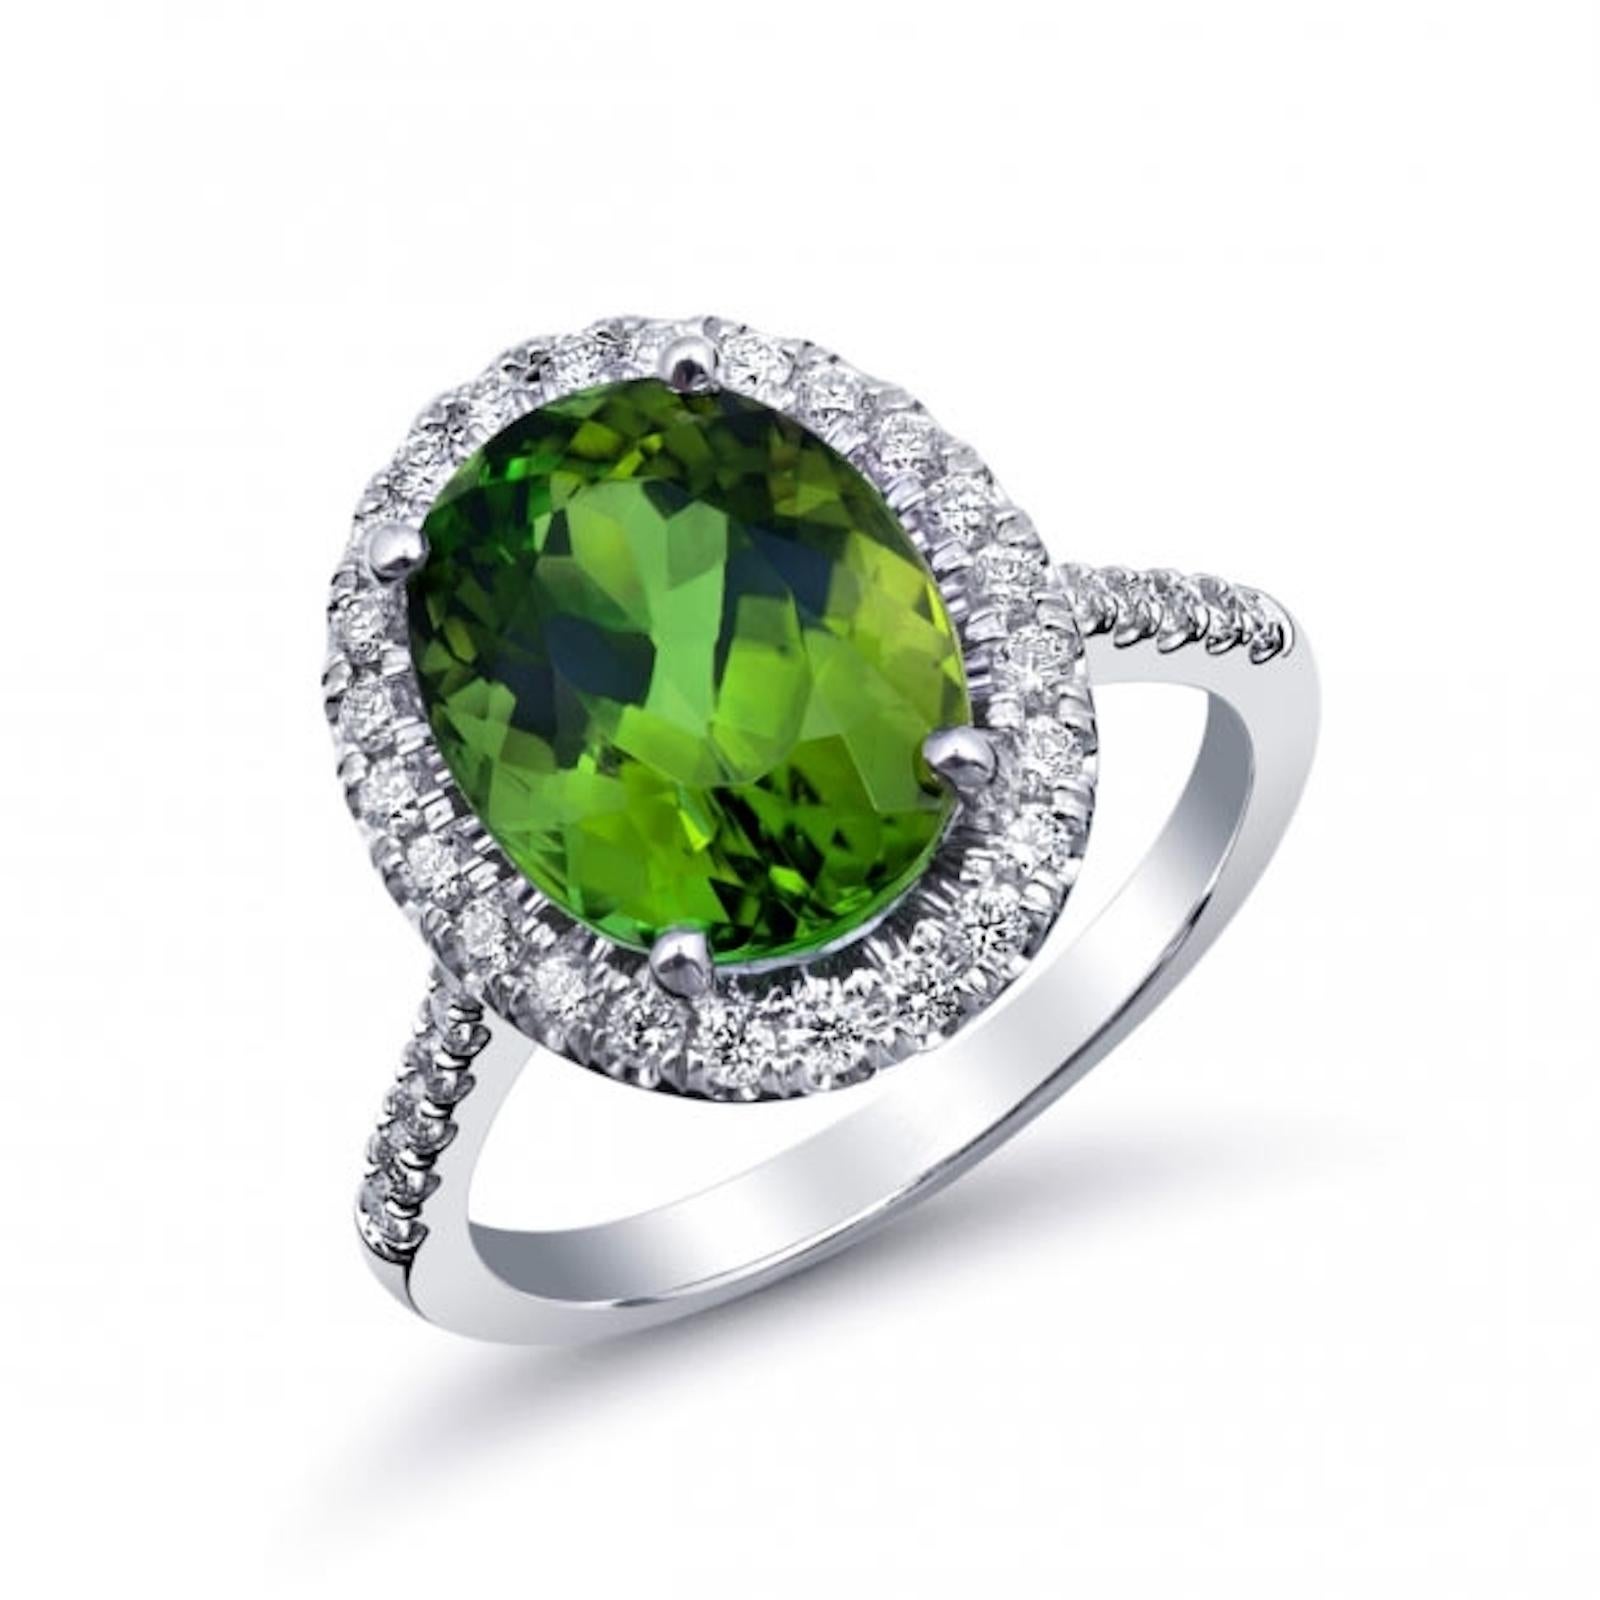  4.53 Carat Green Tourmaline Diamonds  set in 14K White Gold Ring  In New Condition For Sale In Los Angeles, CA